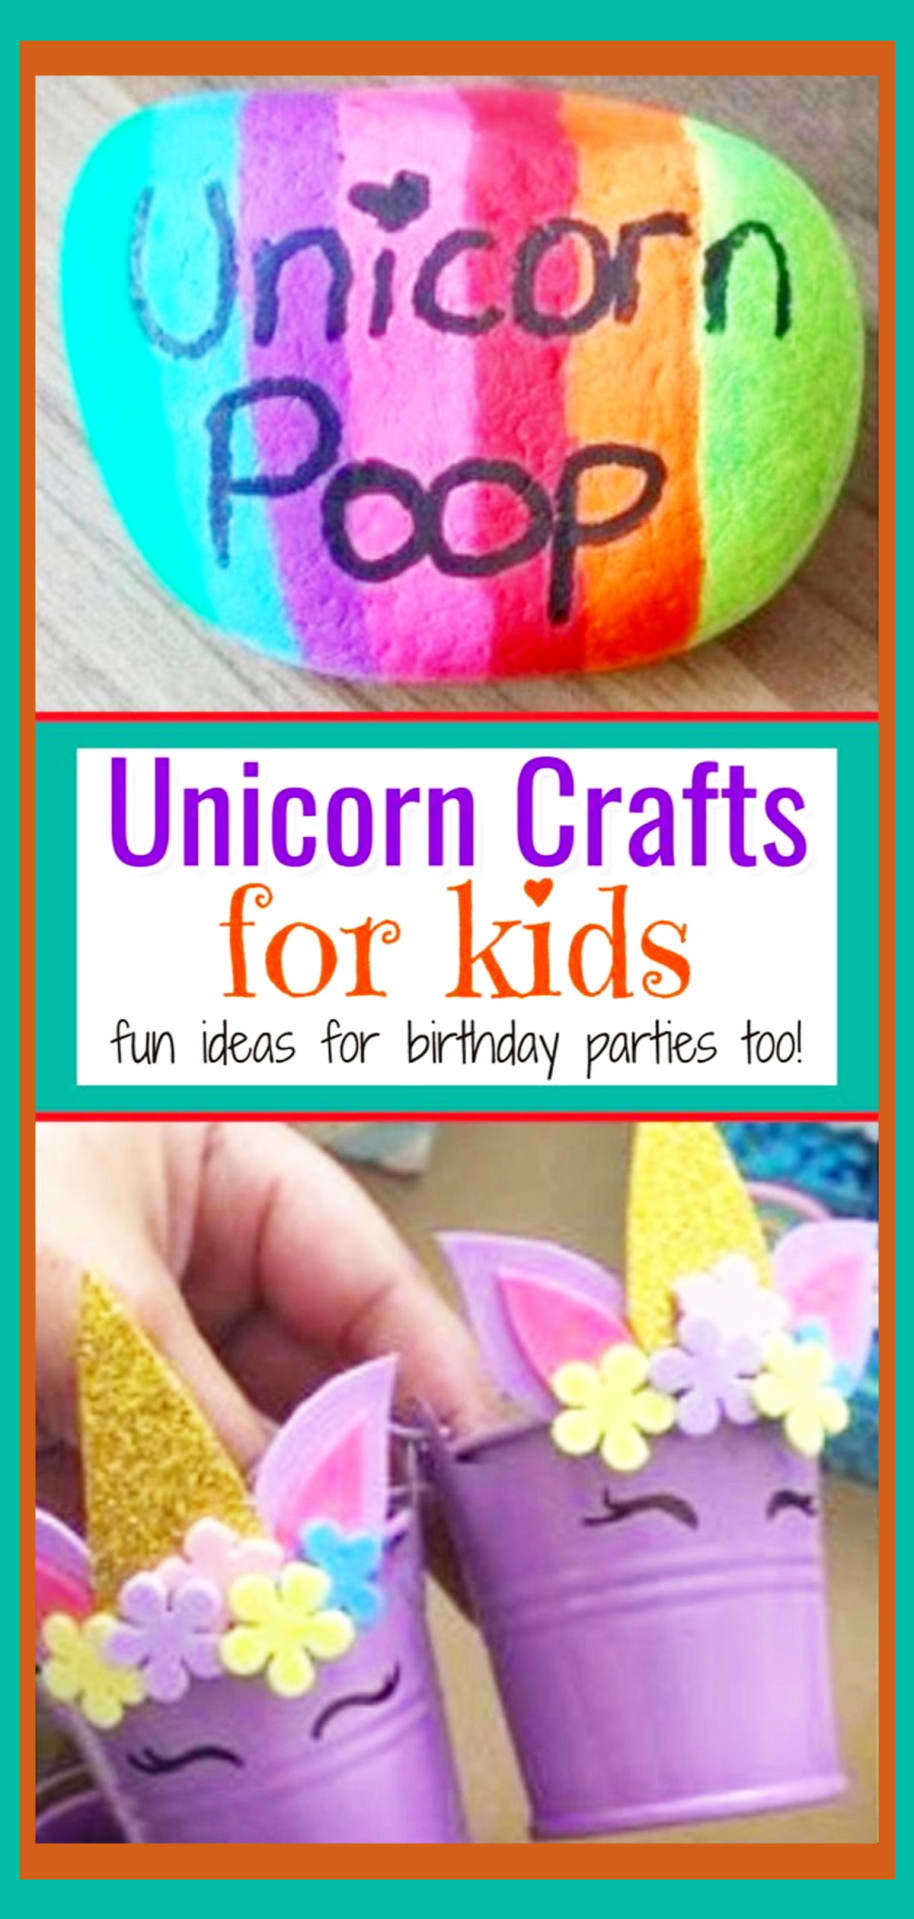 Unicorn birthday party ideas - DIY unicorn birthday party decorations, good bags and more unicorn crafts for kids